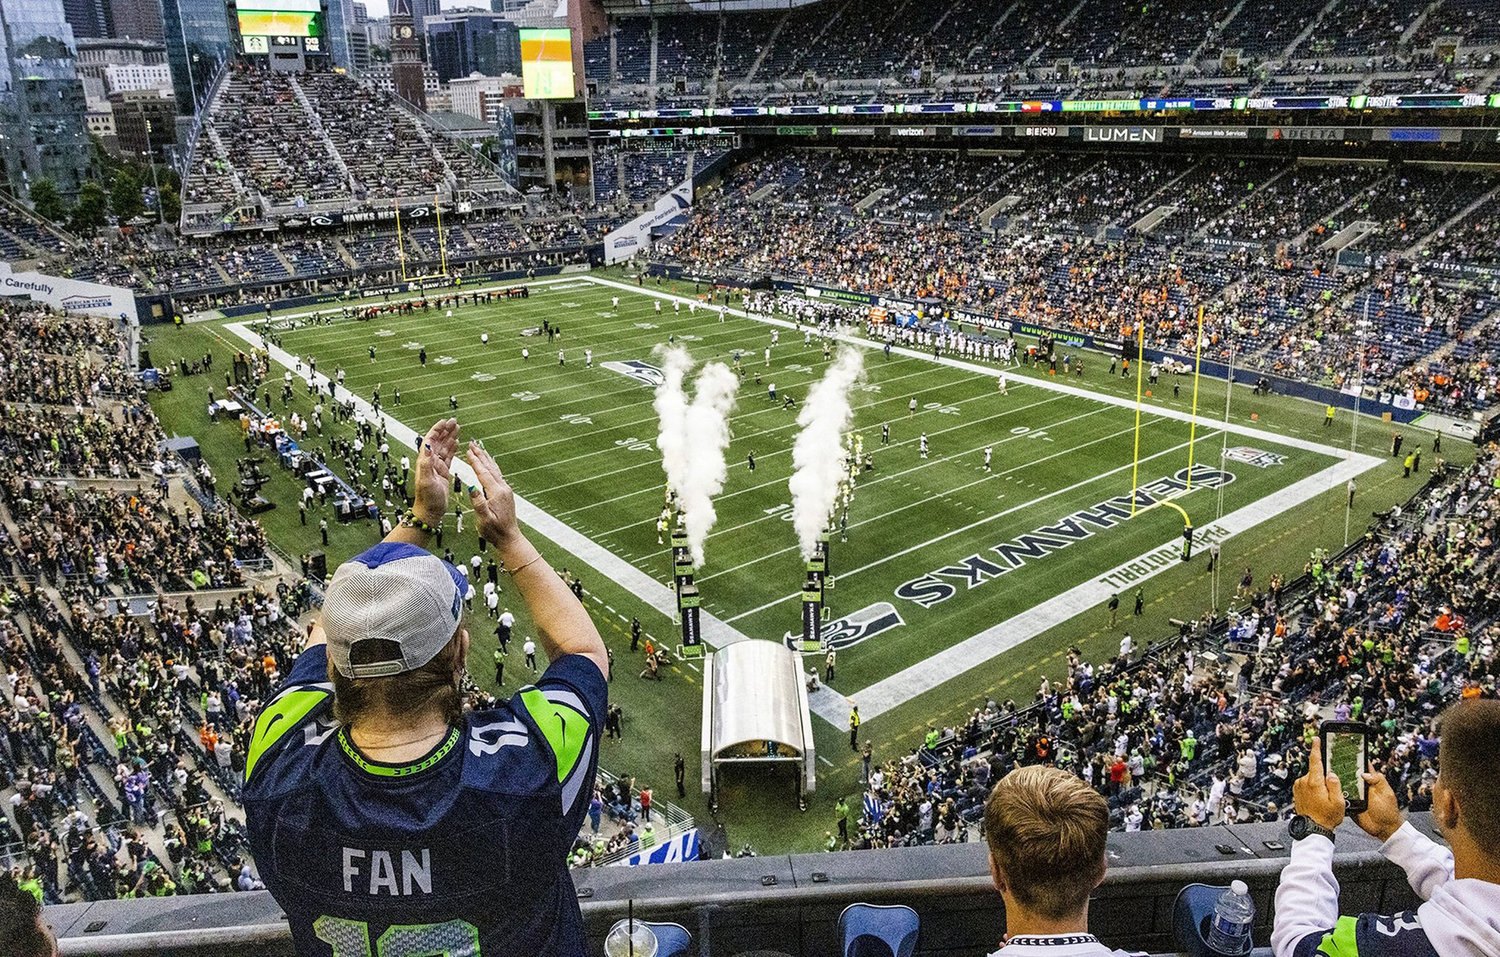 Seahawks fans returned to Lumen Field for the first time in two seasons when the Denver Broncos played the Seattle Seahawks in a preseason game, Aug. 21, 2021.